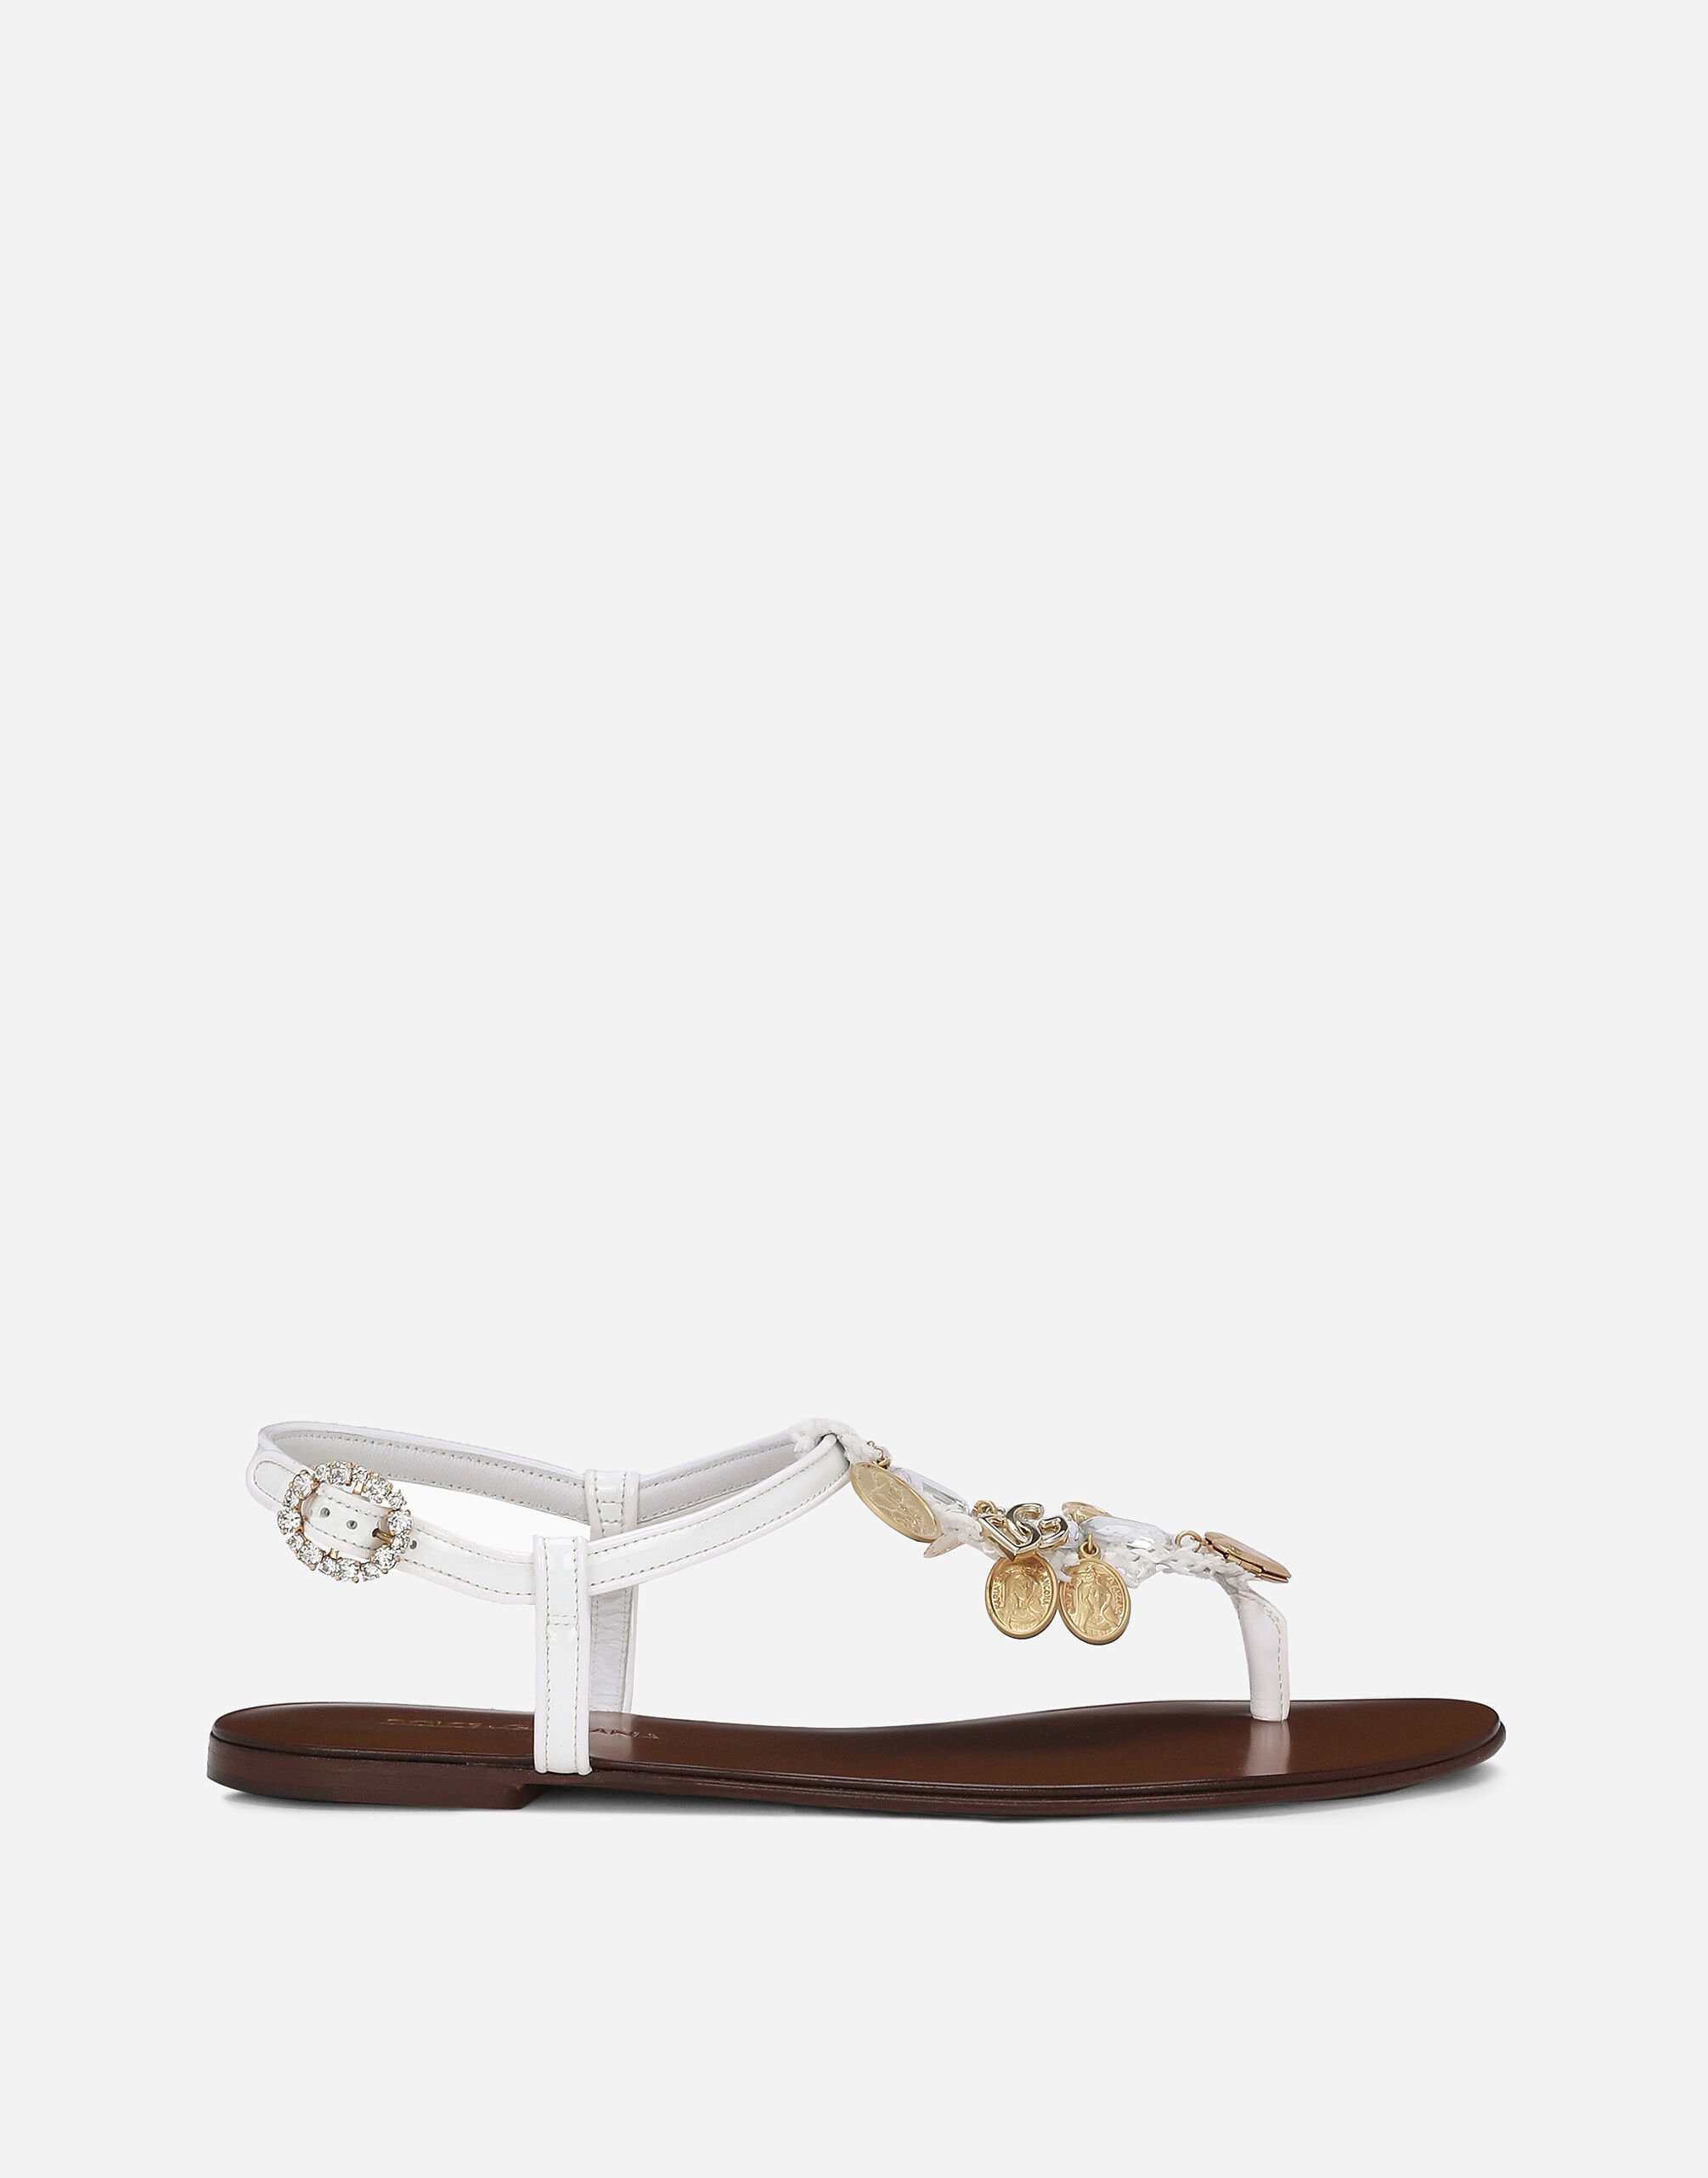 Dolce & Gabbana Raffia thong sandals with embroidered votive medallions Yellow CQ0598AT850